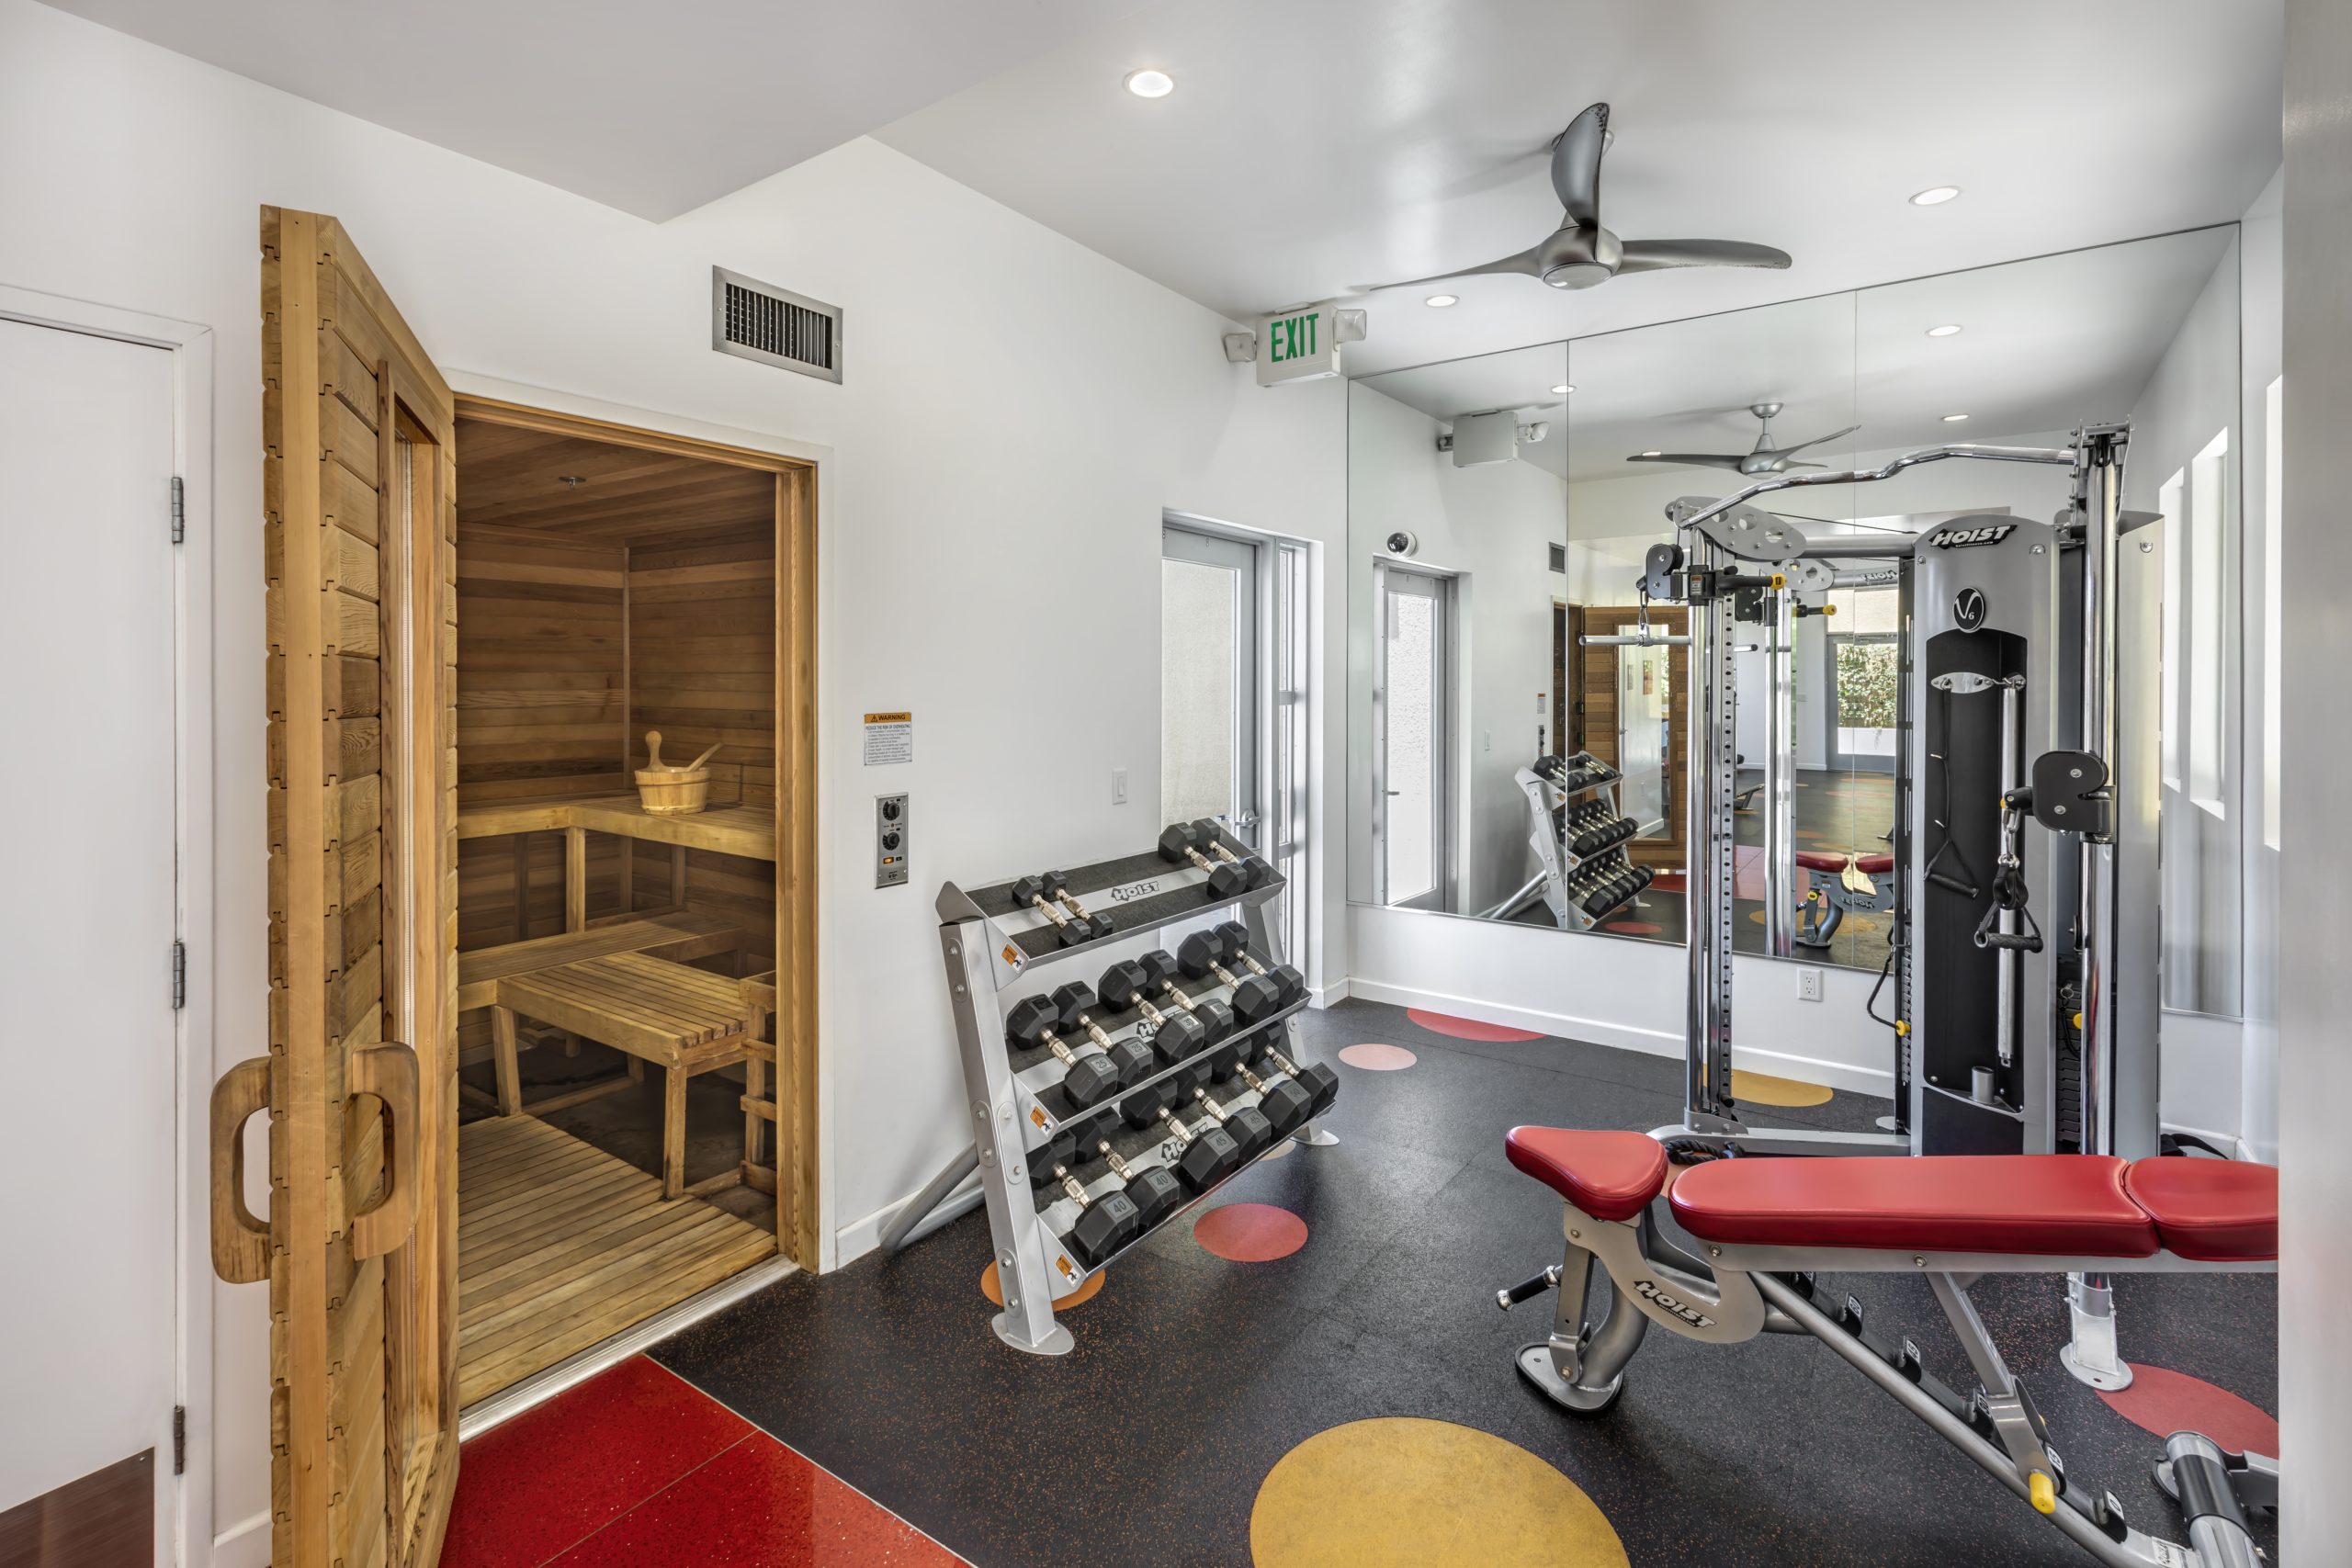 An apartment in Hollywood, CA featuring a gym room with weights and a mirror.